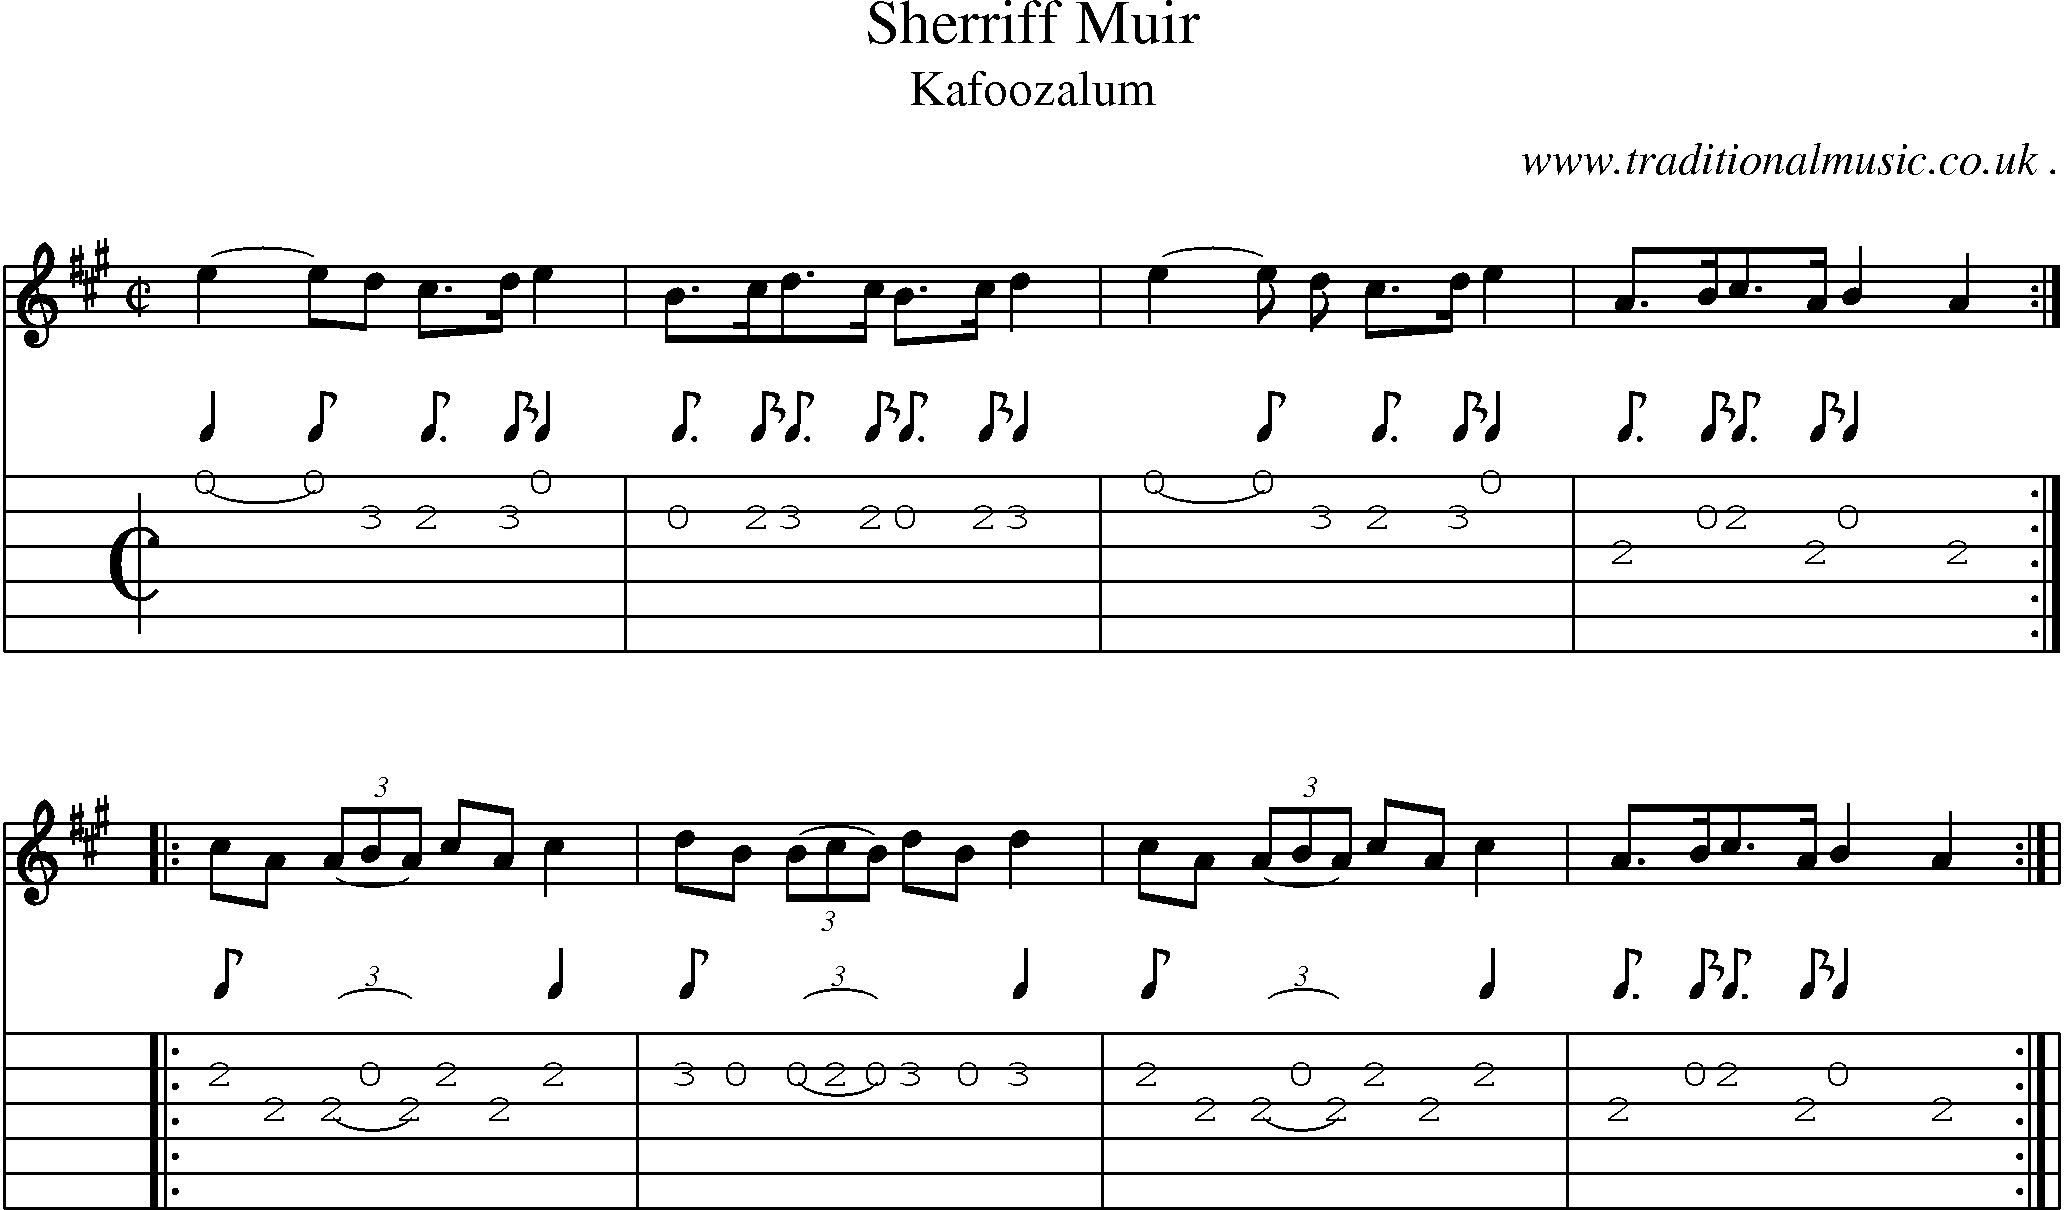 Sheet-Music and Guitar Tabs for Sherriff Muir